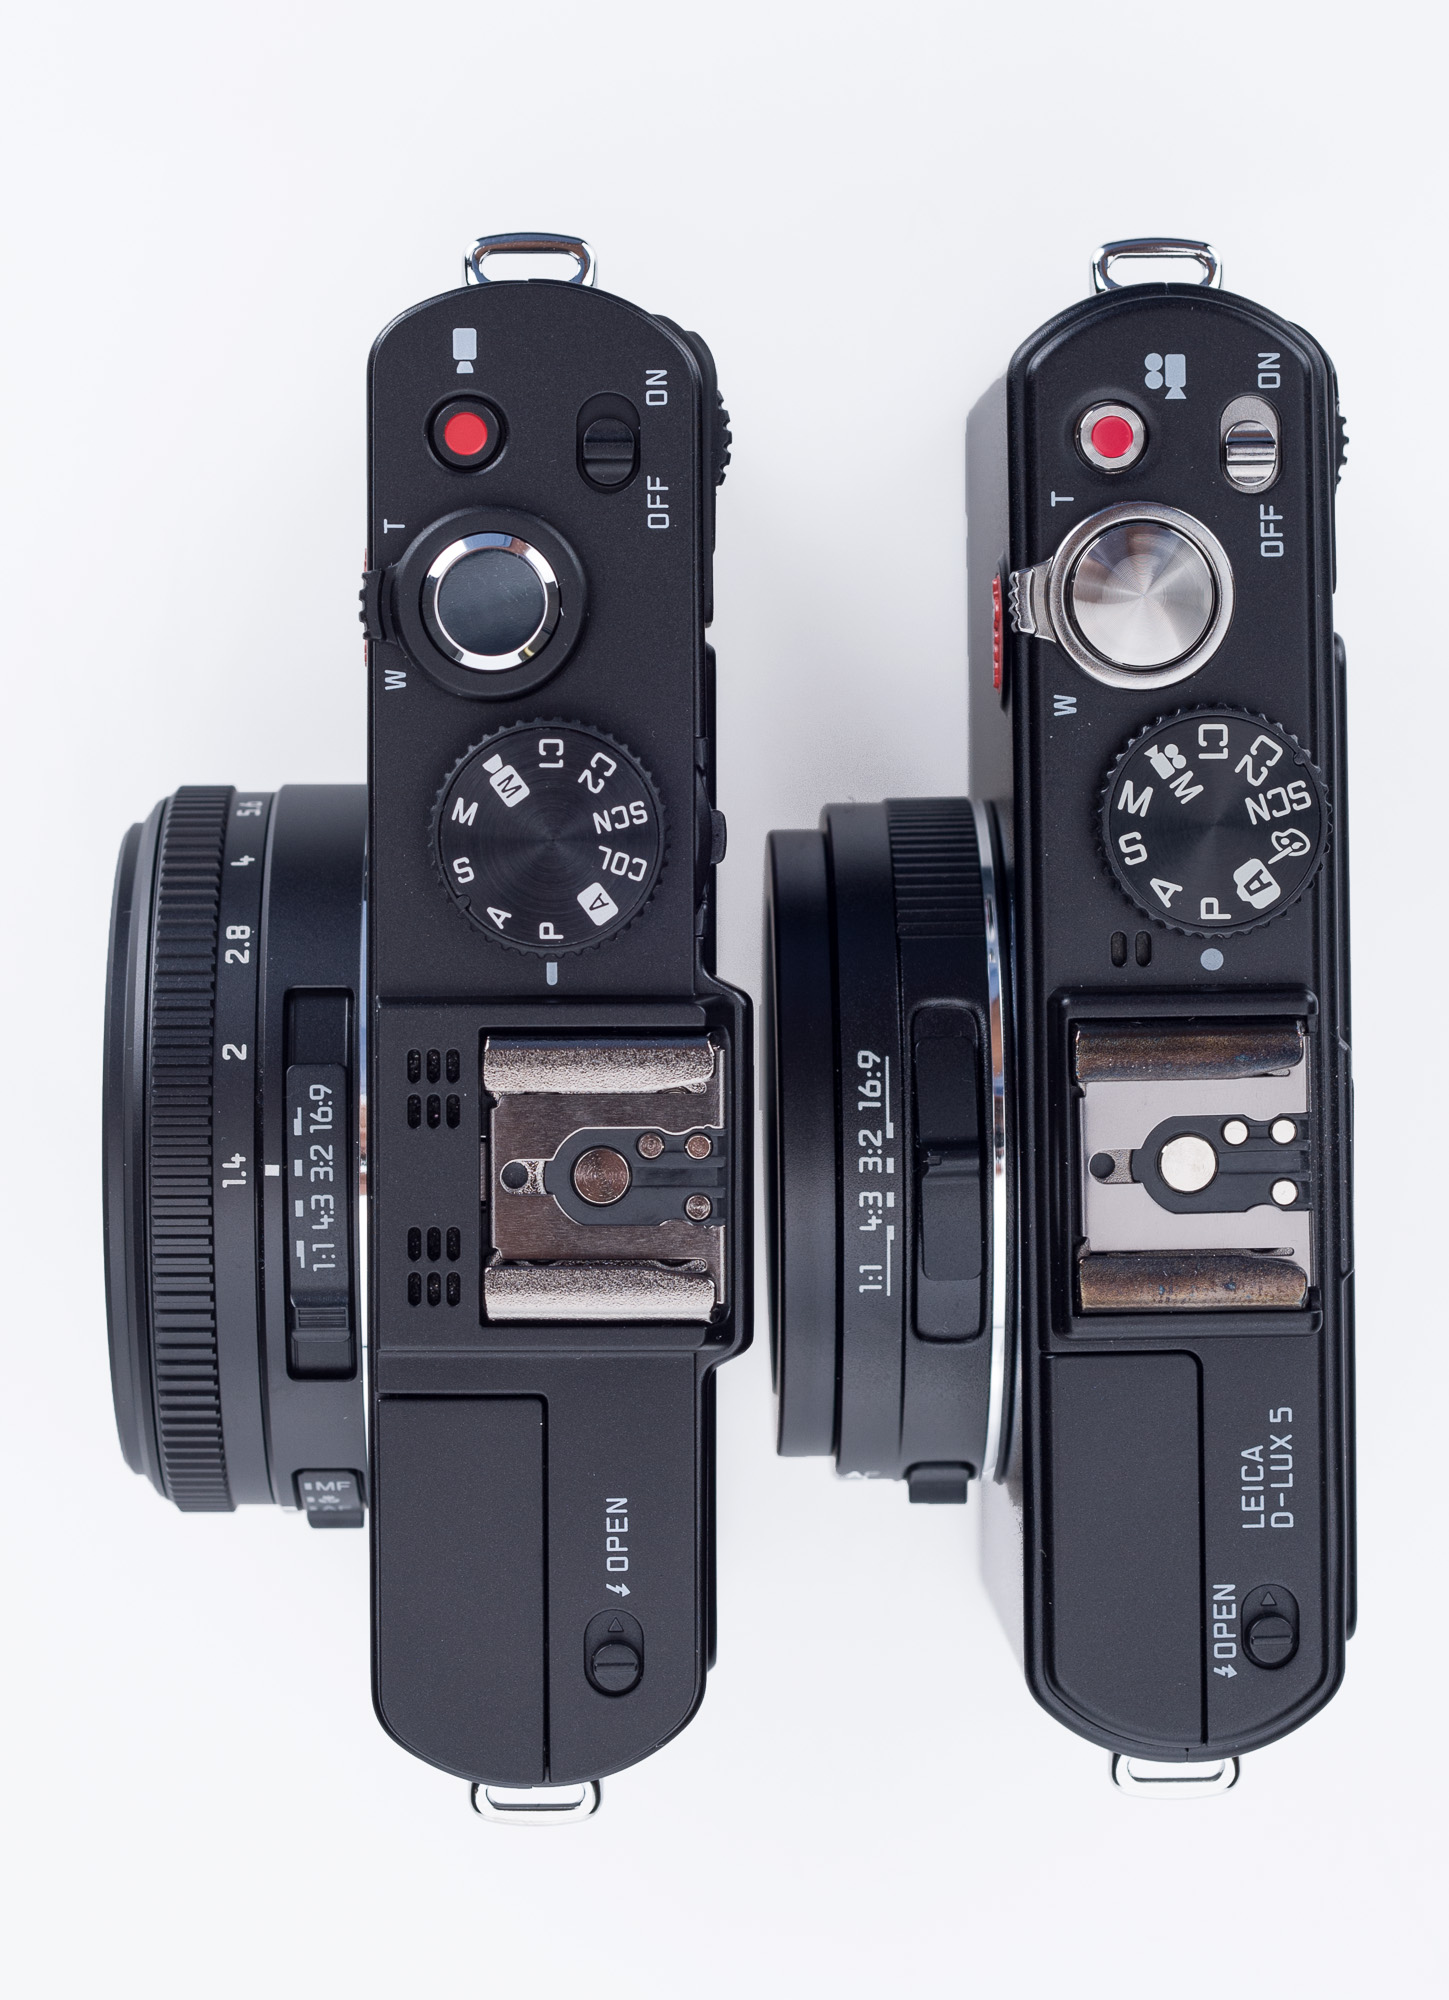 Leica D-Lux 6: Digital Photography Review